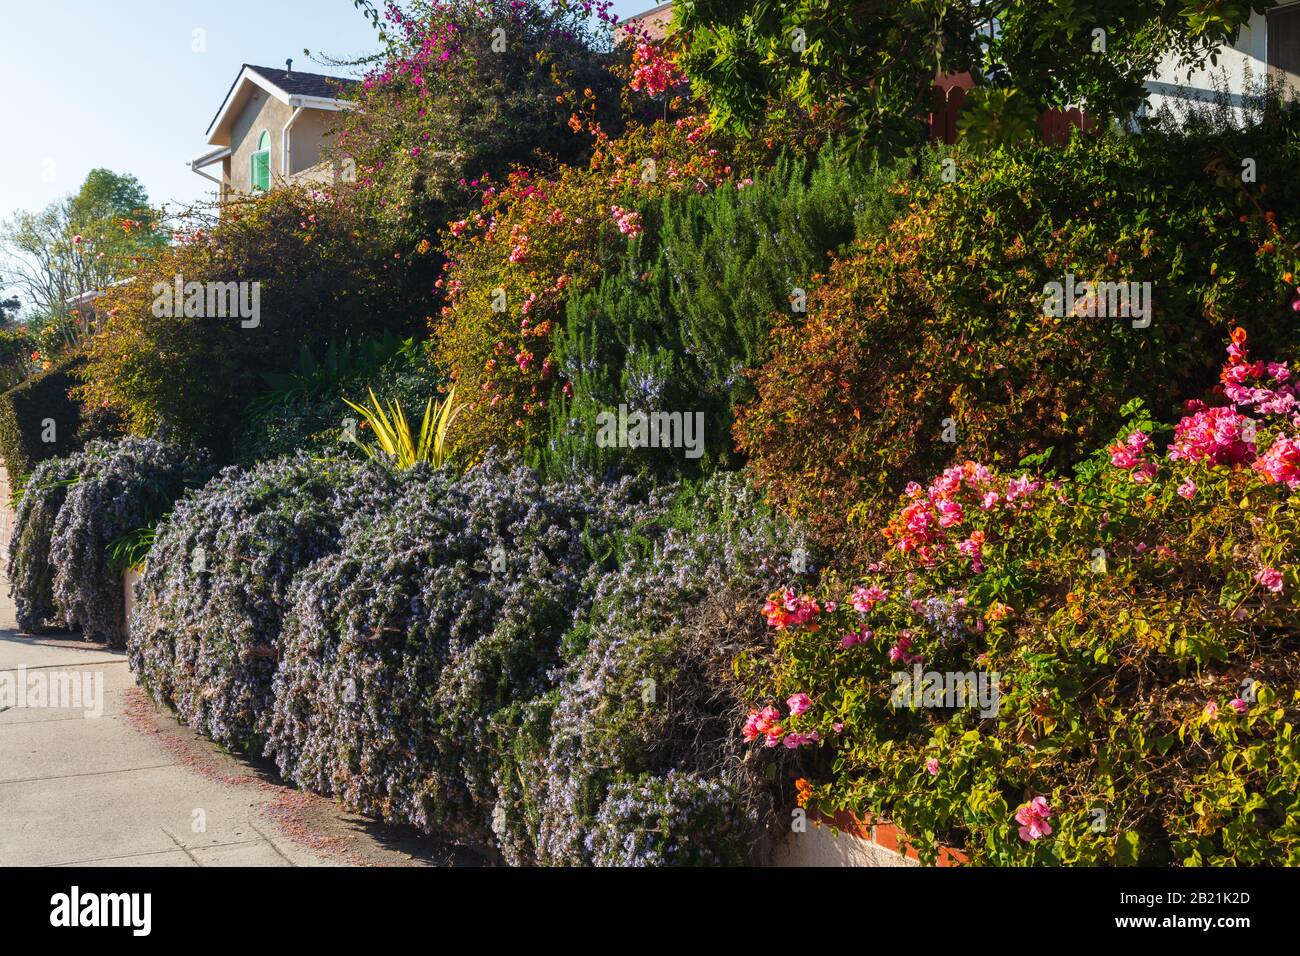 Beautiful California home landscaping example with varied and drought-tolerant plants. Taken from a public space in February 2020. Stock Photo